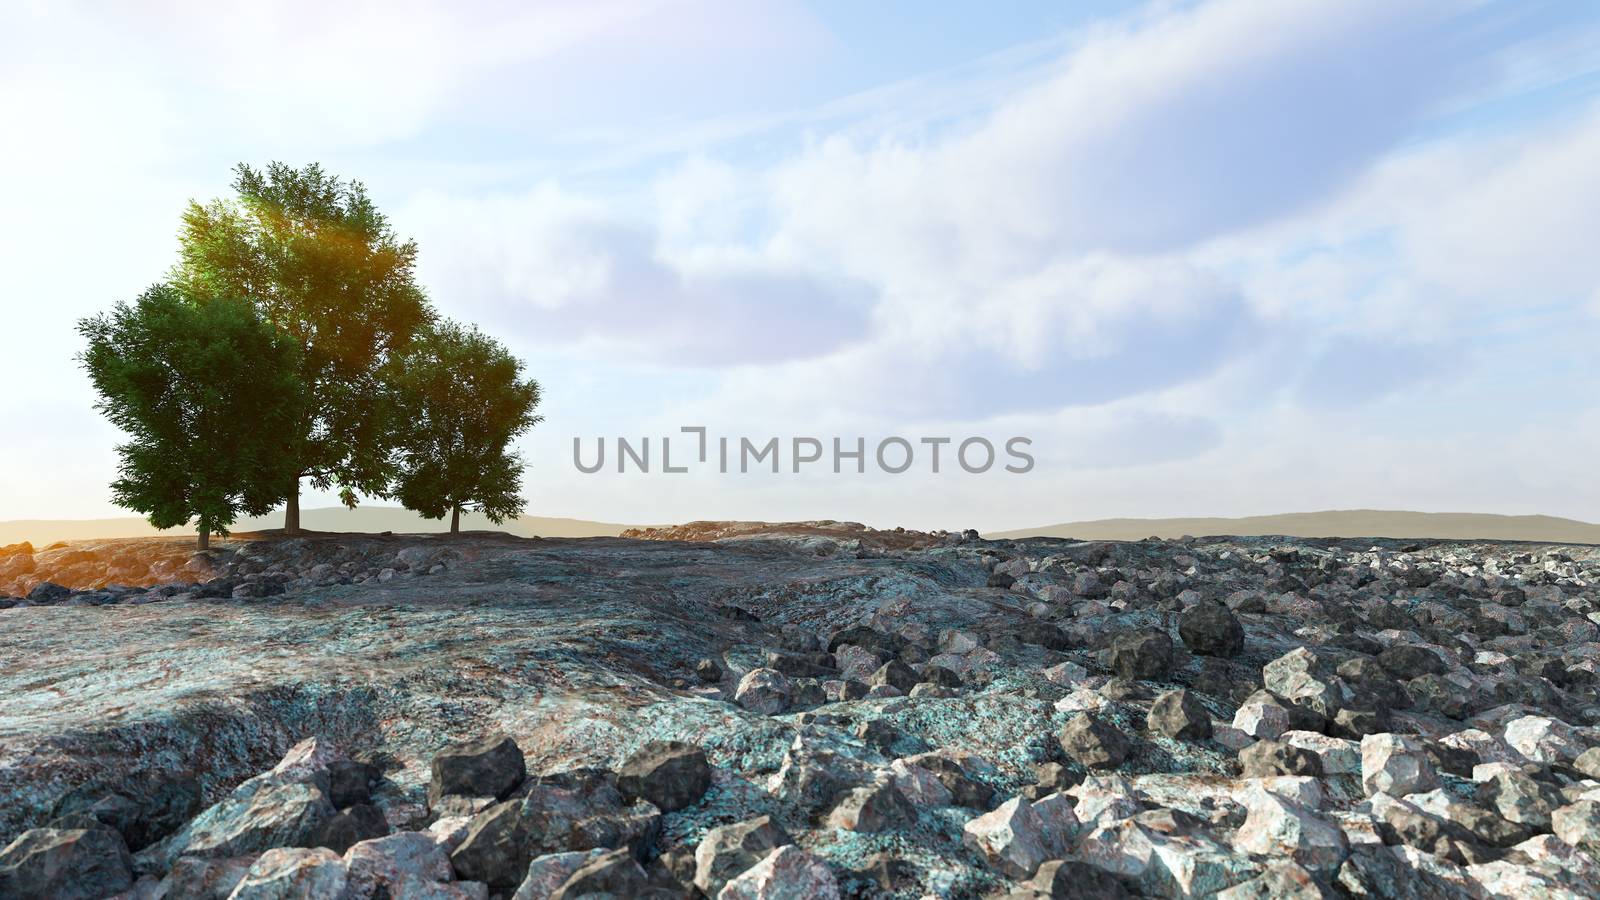 Desert landscape with rocks and trees conceptual composition by denisgo